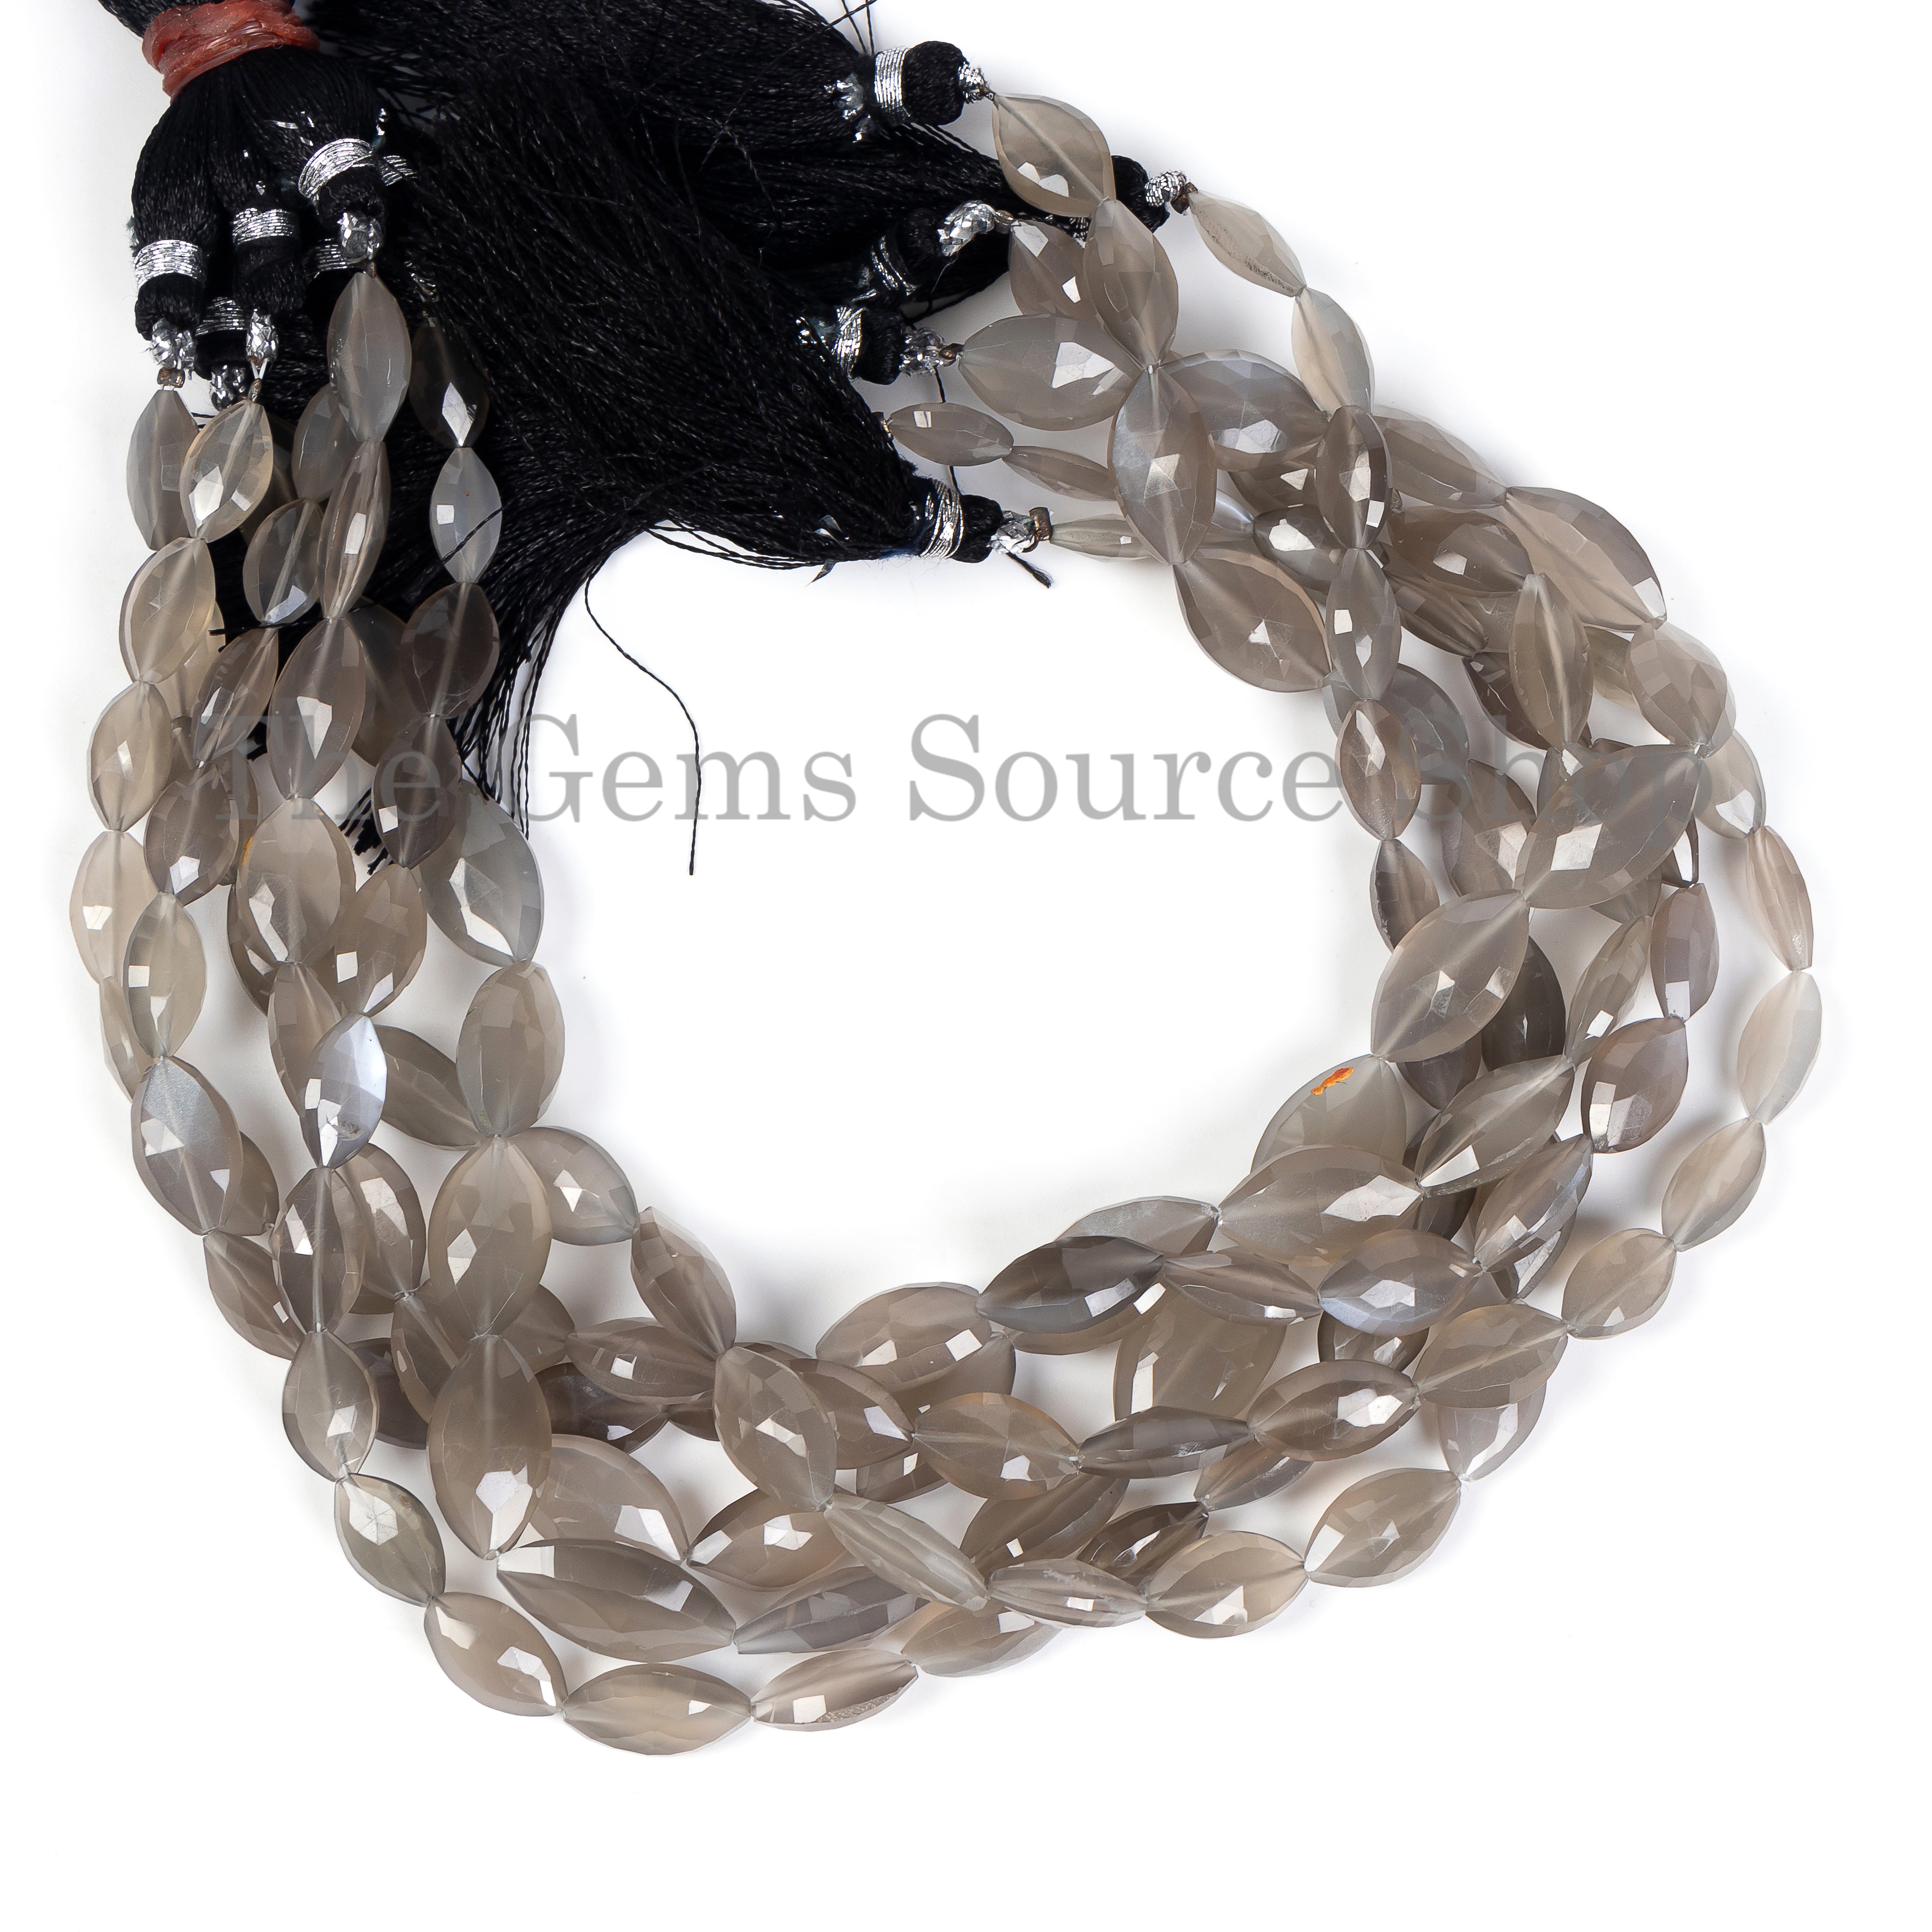 Grey Moonstone Faceted Marquise Beads, Natural Moonstone Gemstone Faceted Beads for Jewelry Making. TGS-5090